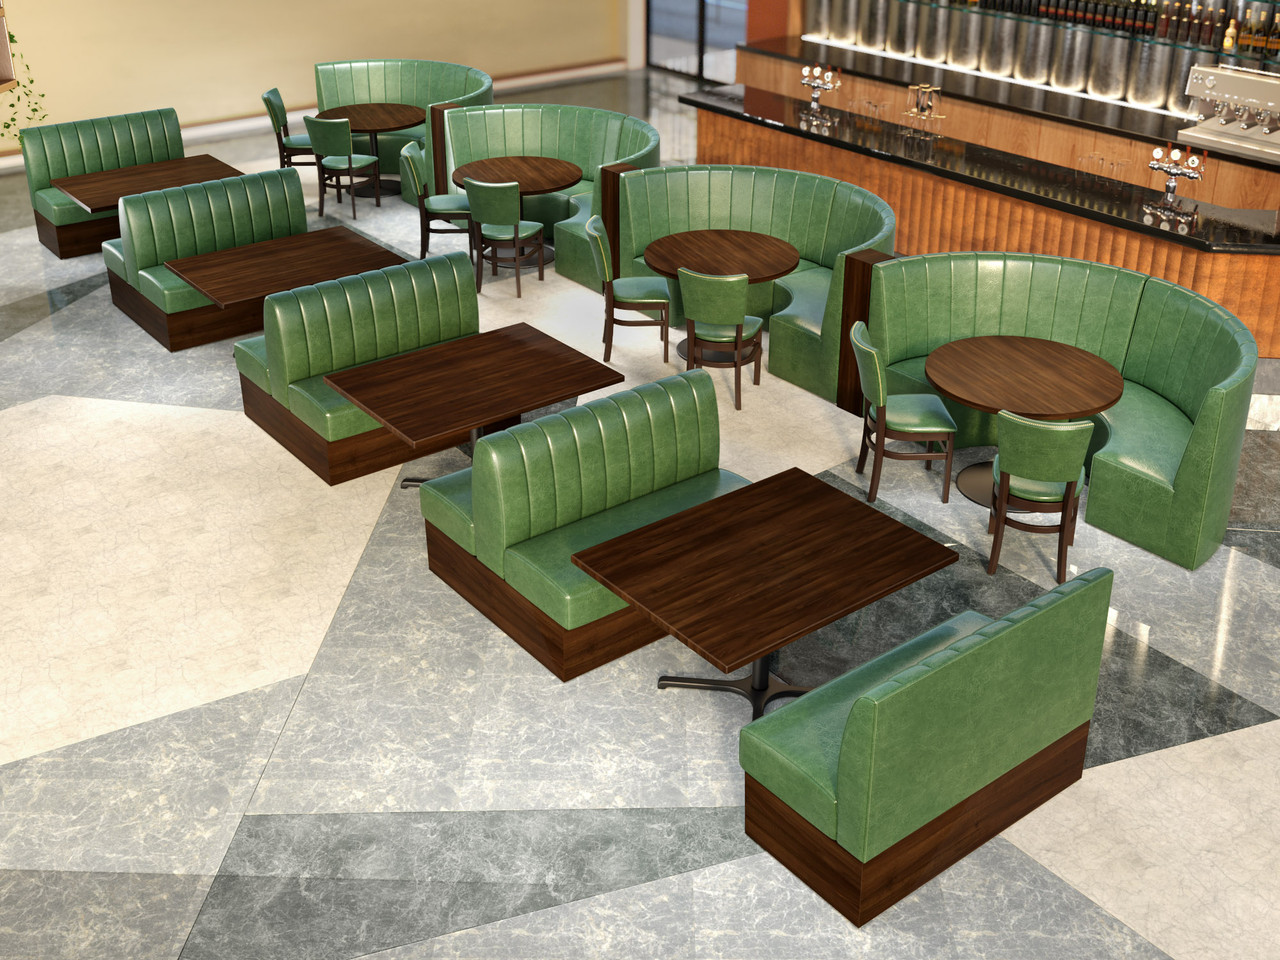 private booth …  Restaurant booth seating, Restaurant seating